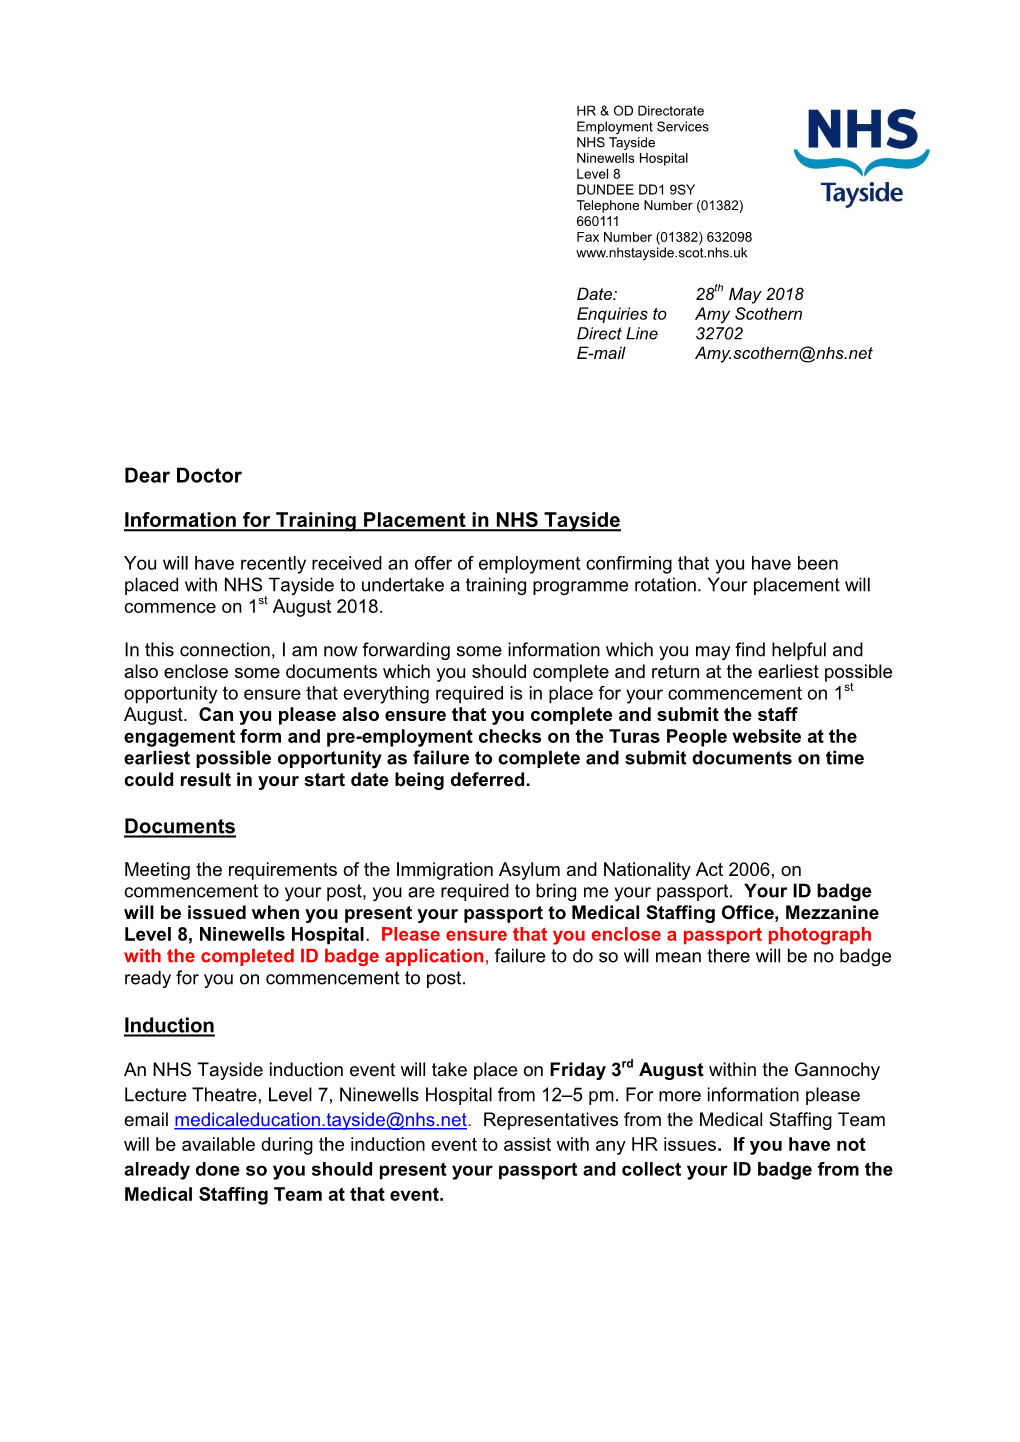 Dear Doctor Information for Training Placement in NHS Tayside